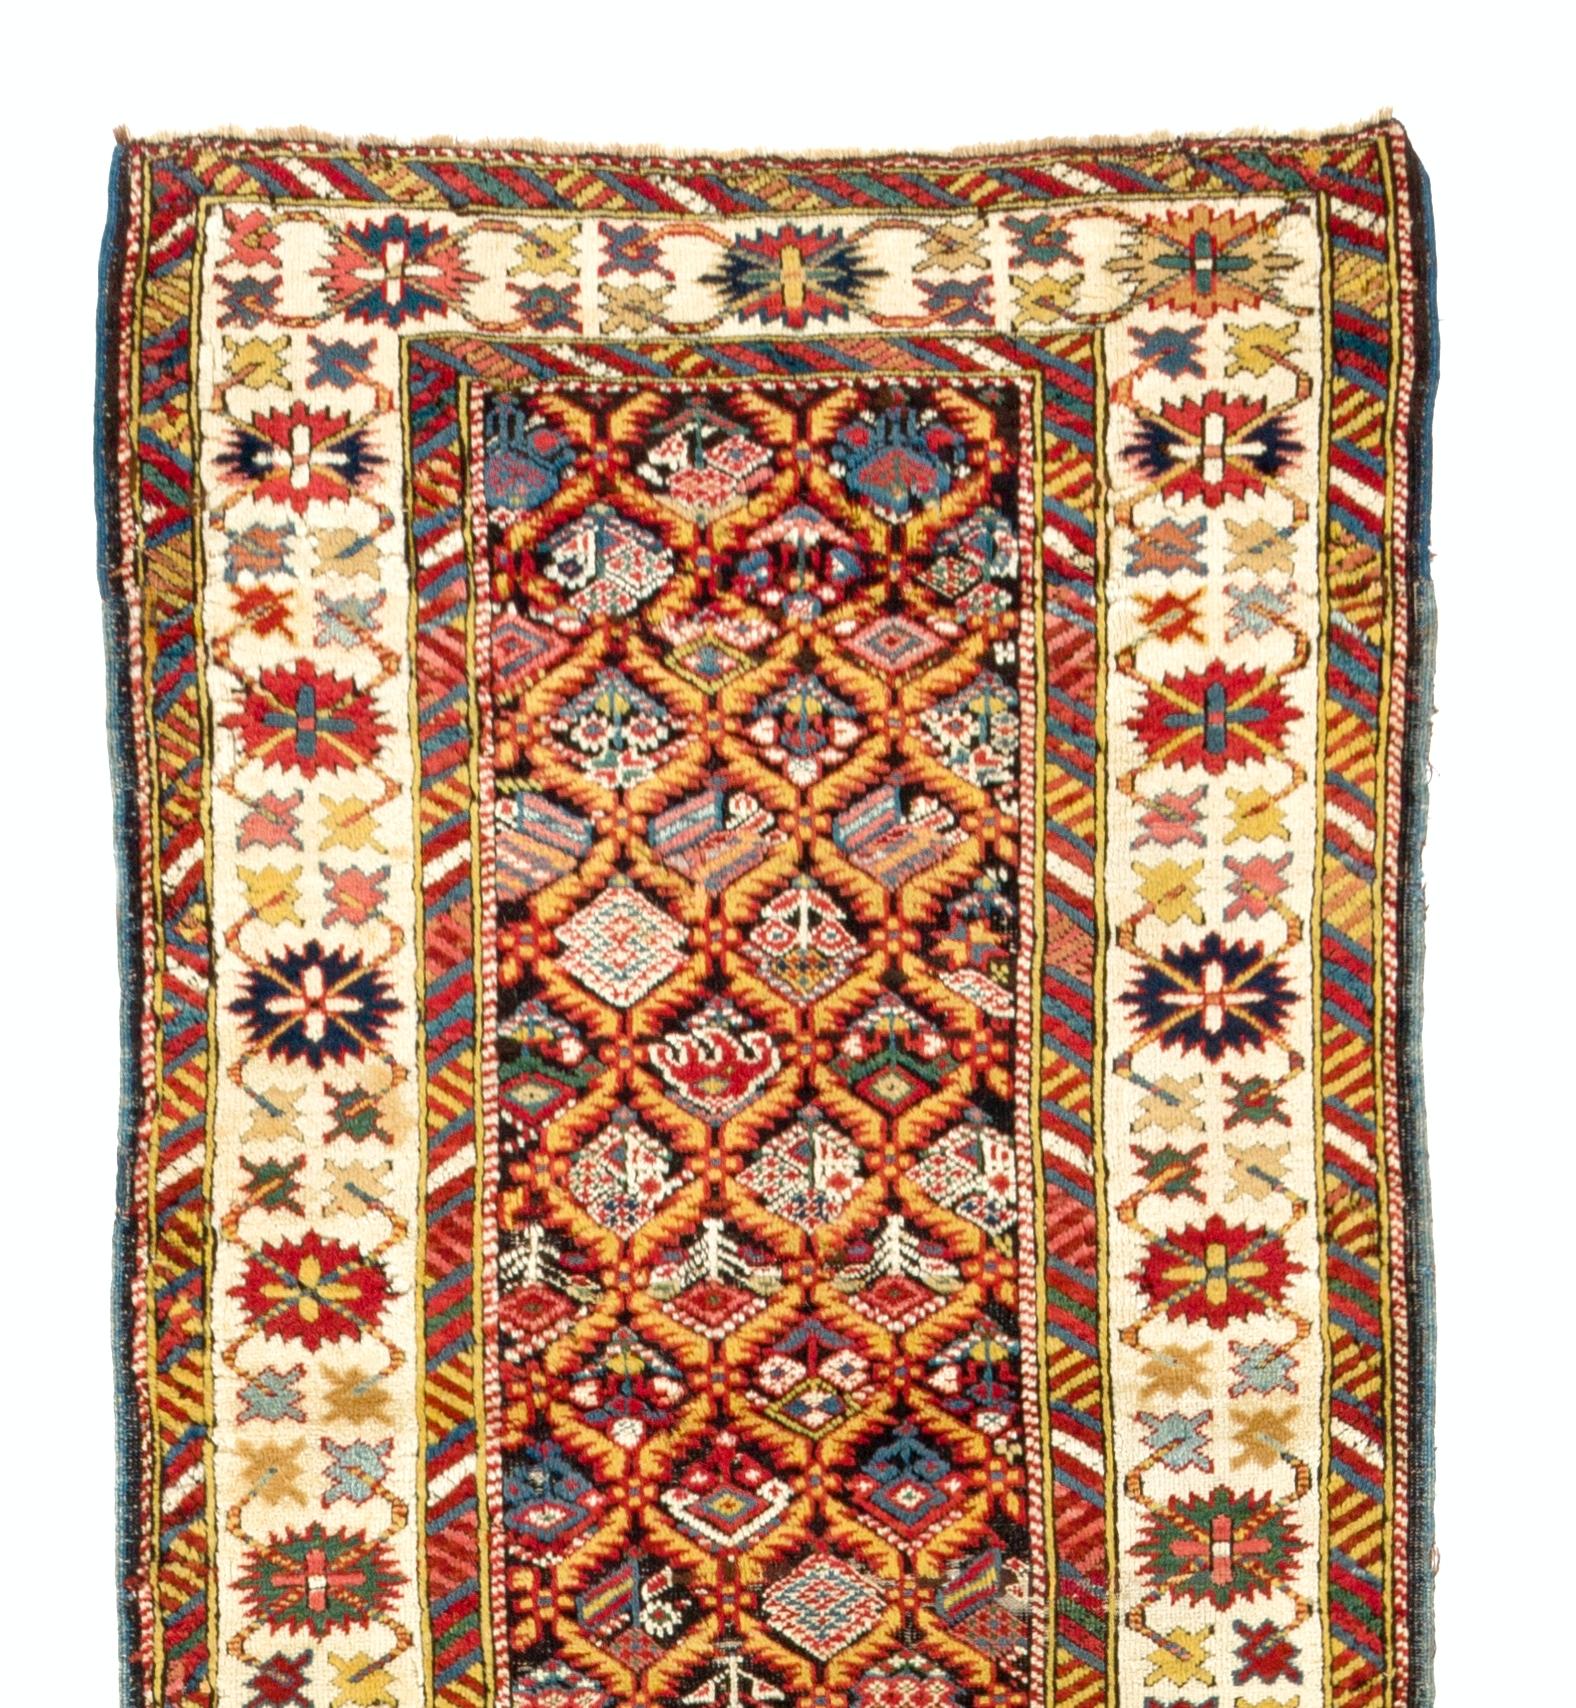 A fine North East Caucasian runner with an intricate design and refined natural dyes. Excellent condition. Sturdy and as clean as a brand new rug (deep washed professionally). Measures: 3 x 11 ft.